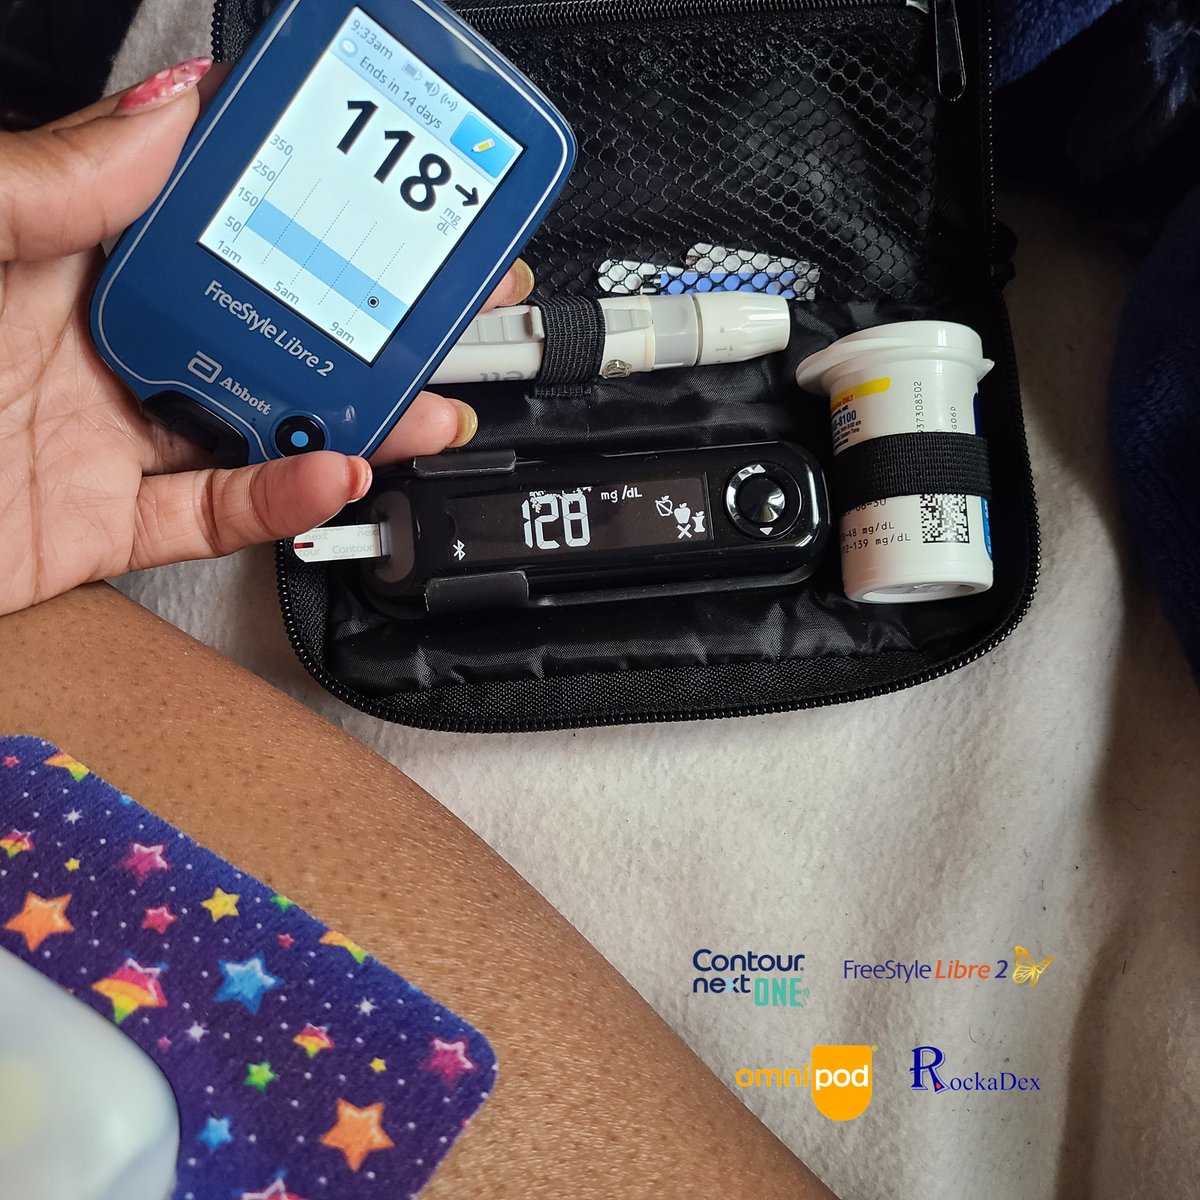 I am so tired & my fingers are sore!
Had to treat lows using fingers pricks!
Thankfully I'm back online now!

#BlackDiabetic #BlackQueen #DiaBadAss #T1D #DiabetesWarrior #DiabeticActress #T1DActress #T1DLife #T1DDancer #T1DBowler #DiabetesAwareness